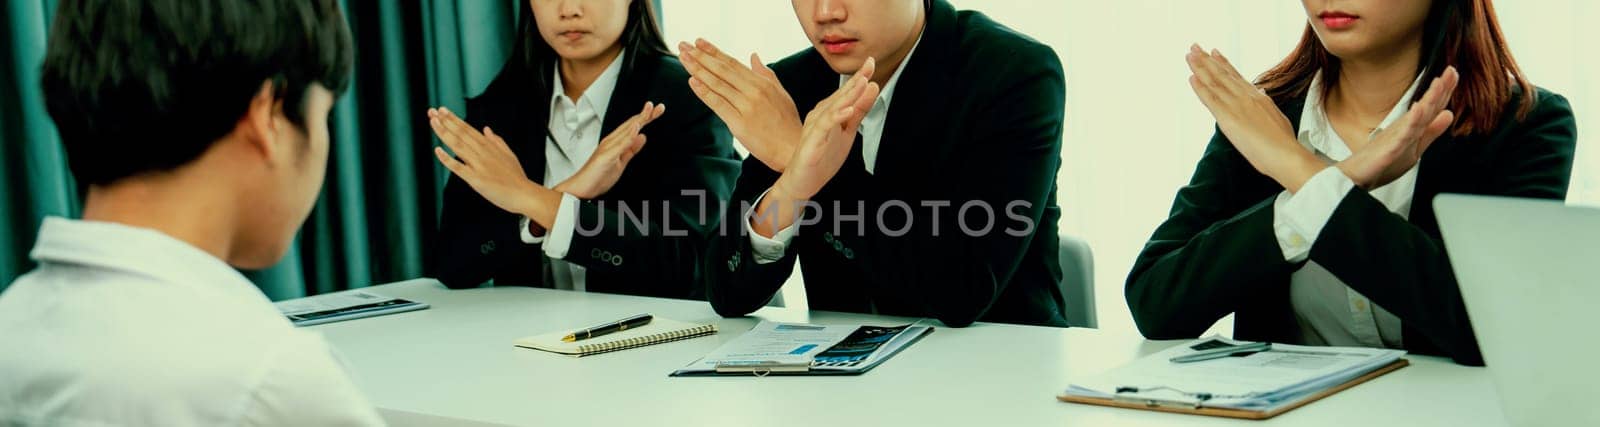 Candidate is rejected by job interviewer and human resources manager showing concept of unemployment, fired, disagreement and turning down the offer putting sadness on hiring person. Oratory failure.